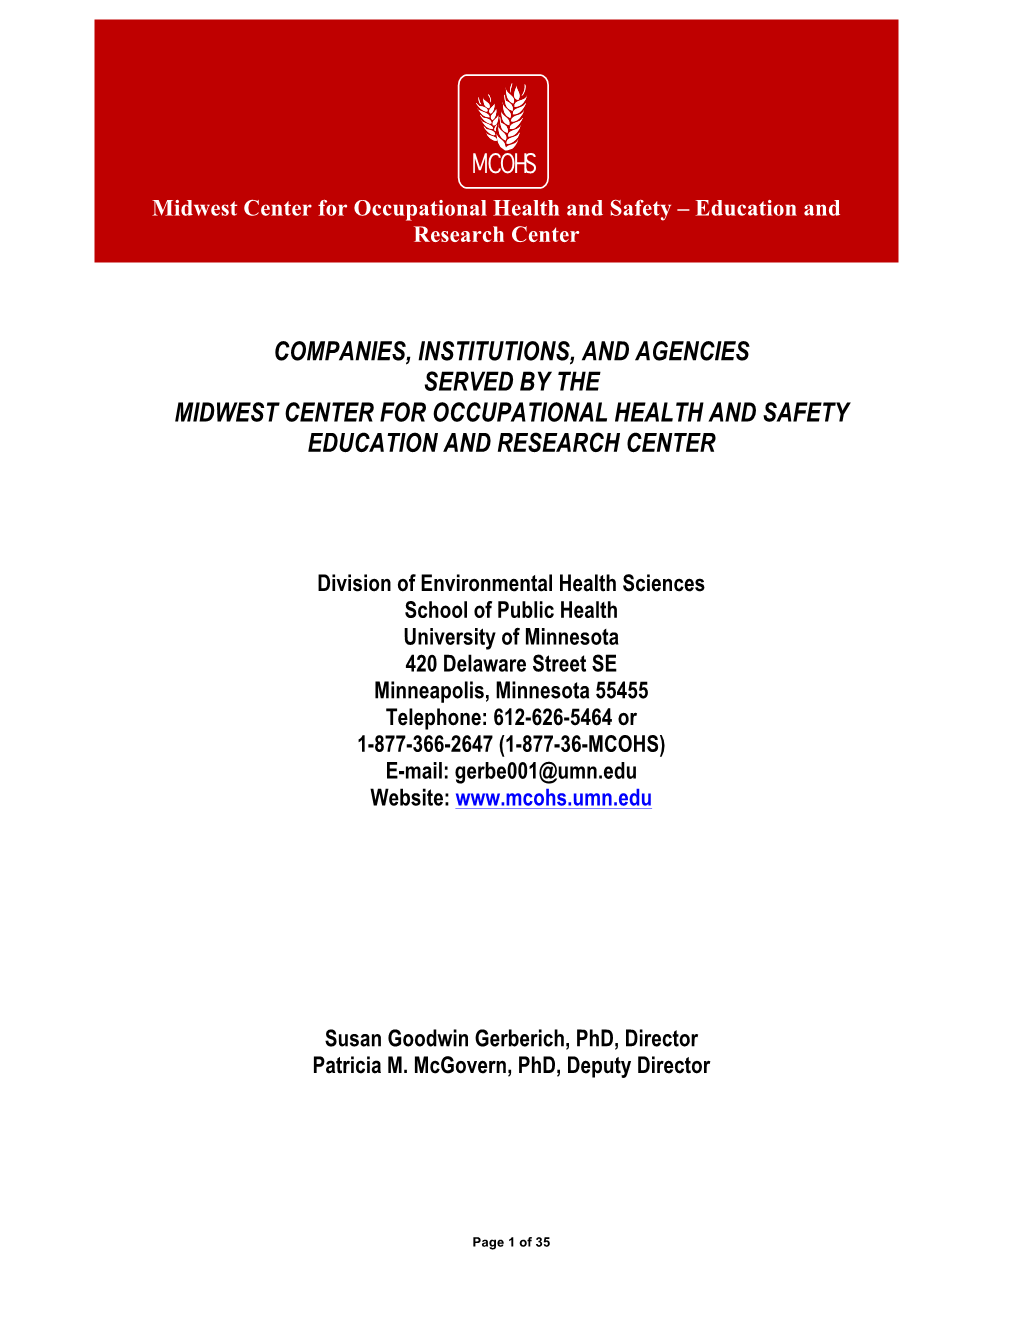 Companies, Institutions, and Agencies Served by the Midwest Center for Occupational Health and Safety Education and Research Center